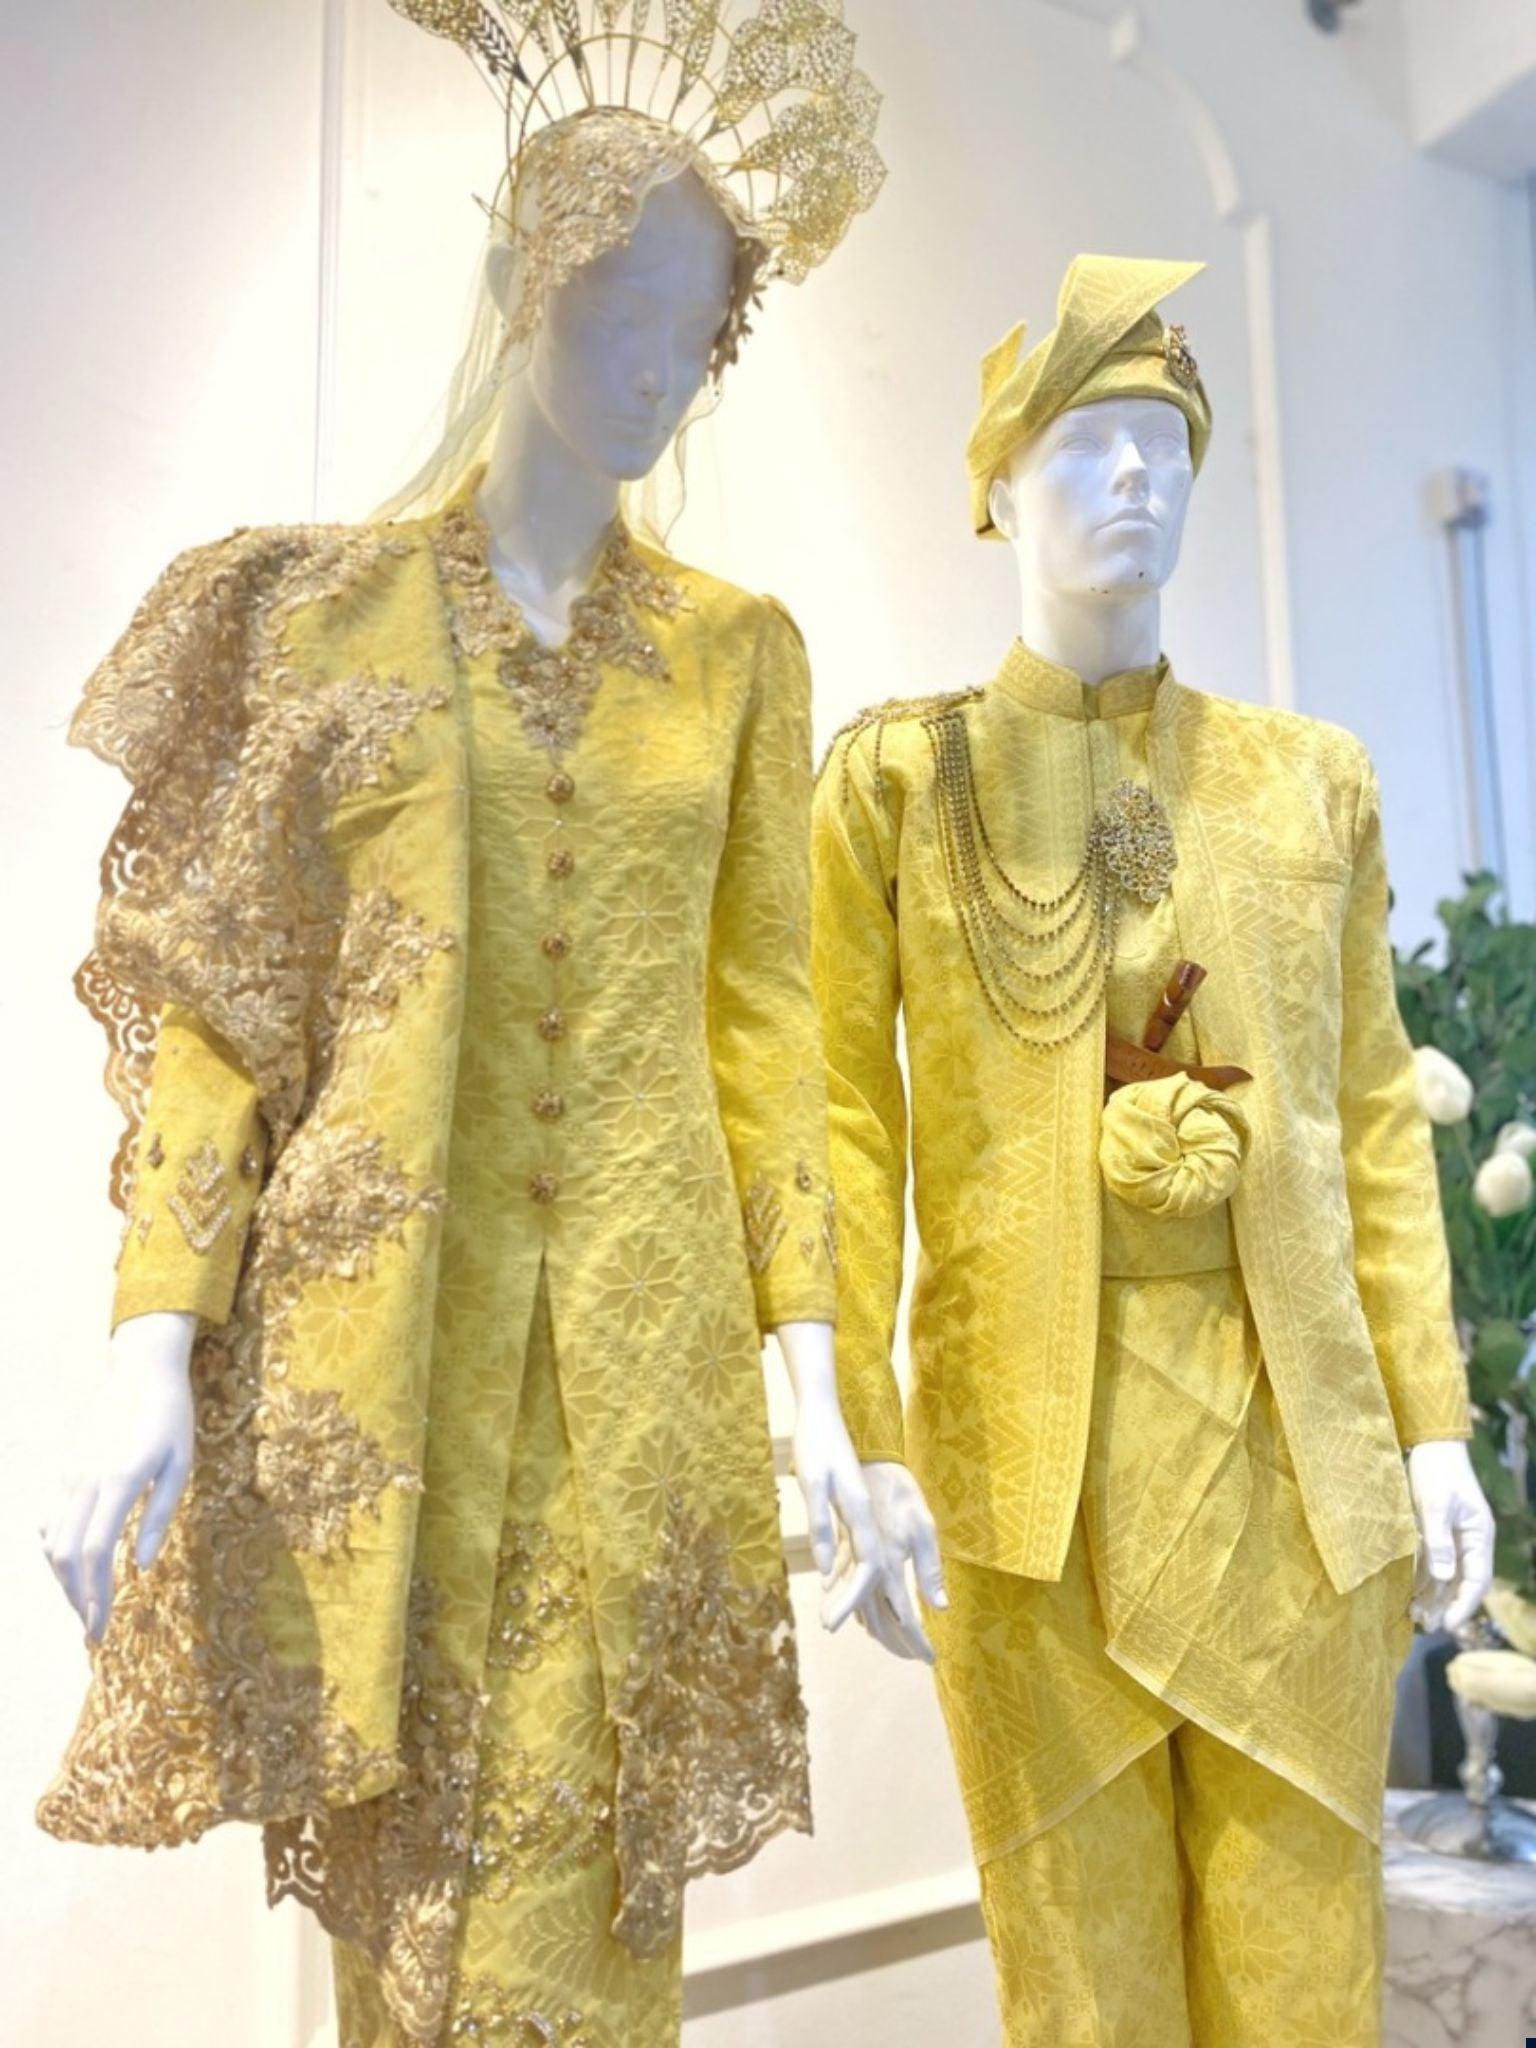 You'll love The PUTERI SAADONG - Baju Sanding Kurung Belah Songket yellow & light gold from PP Signature Bridal. Rent online or book an appointment today!